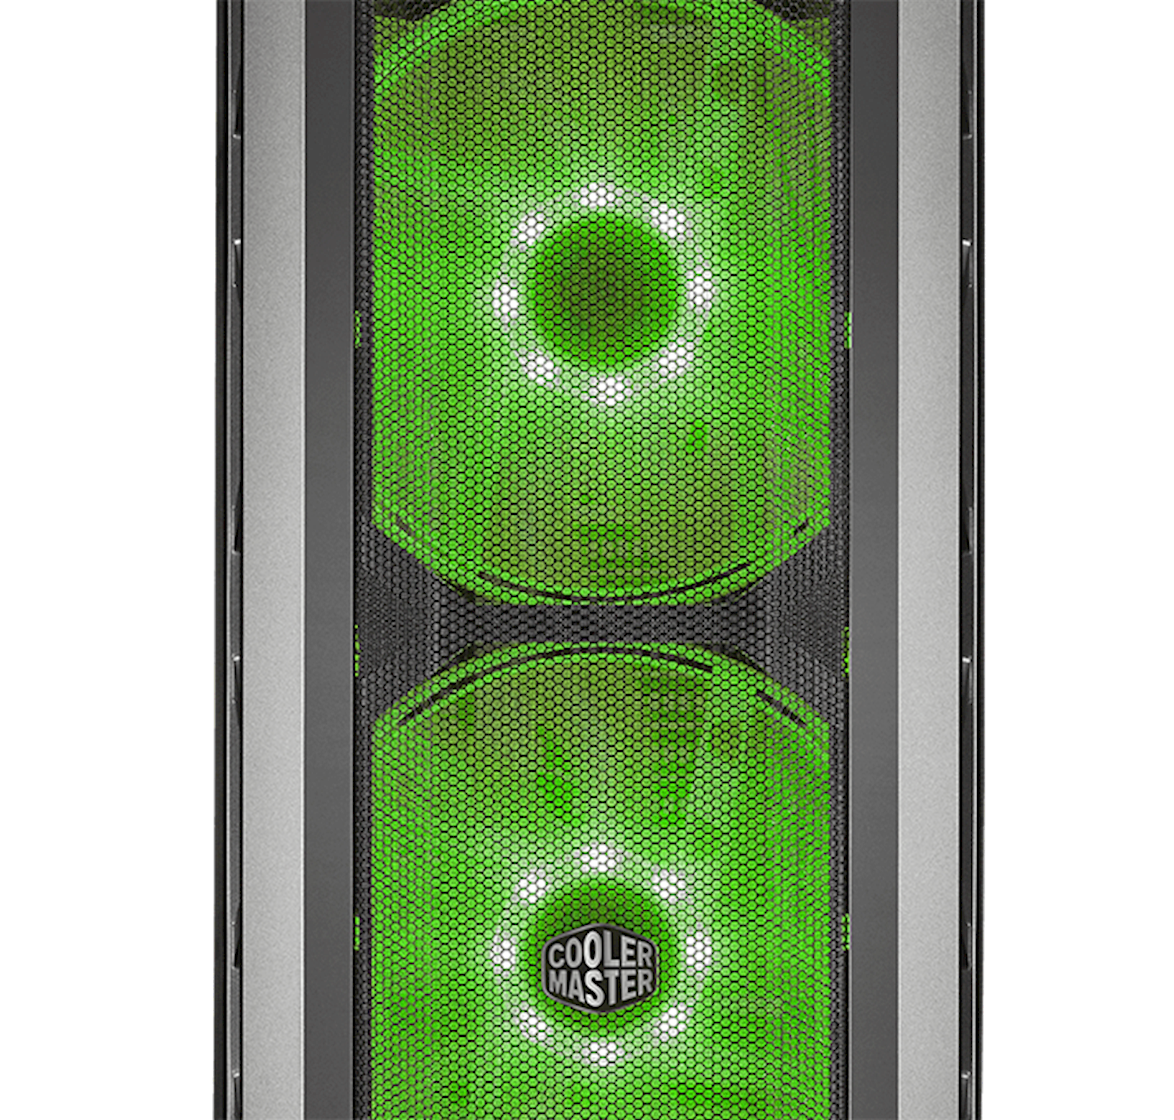 Two 200mm Rgb Fans Behind A Mesh Front Panel